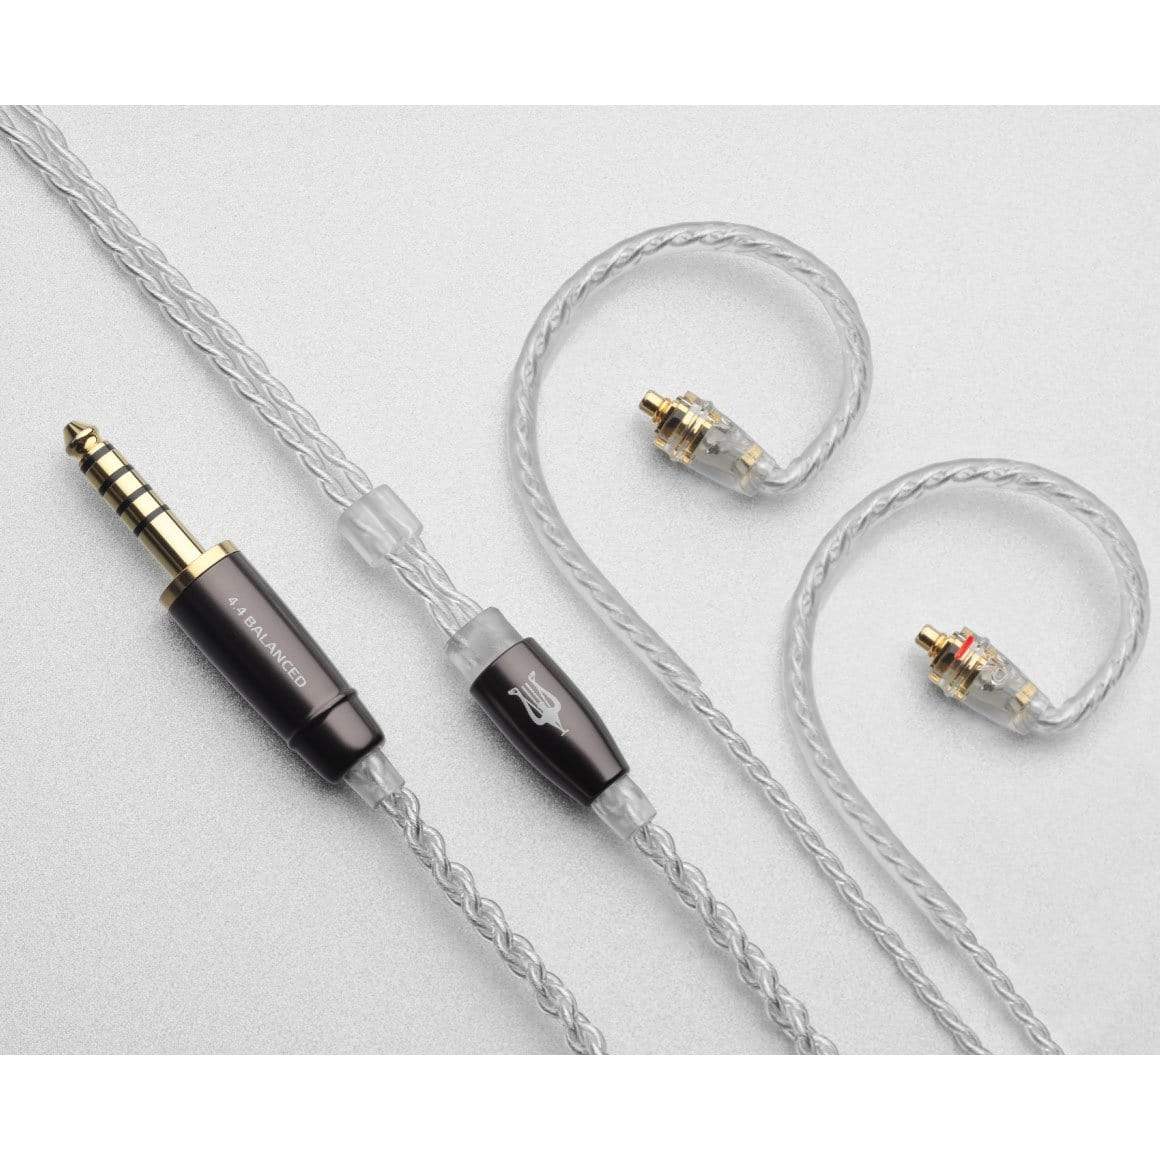 Meze - MMCX to 4.4mm Balanced Silver Plated Upgrade Cable